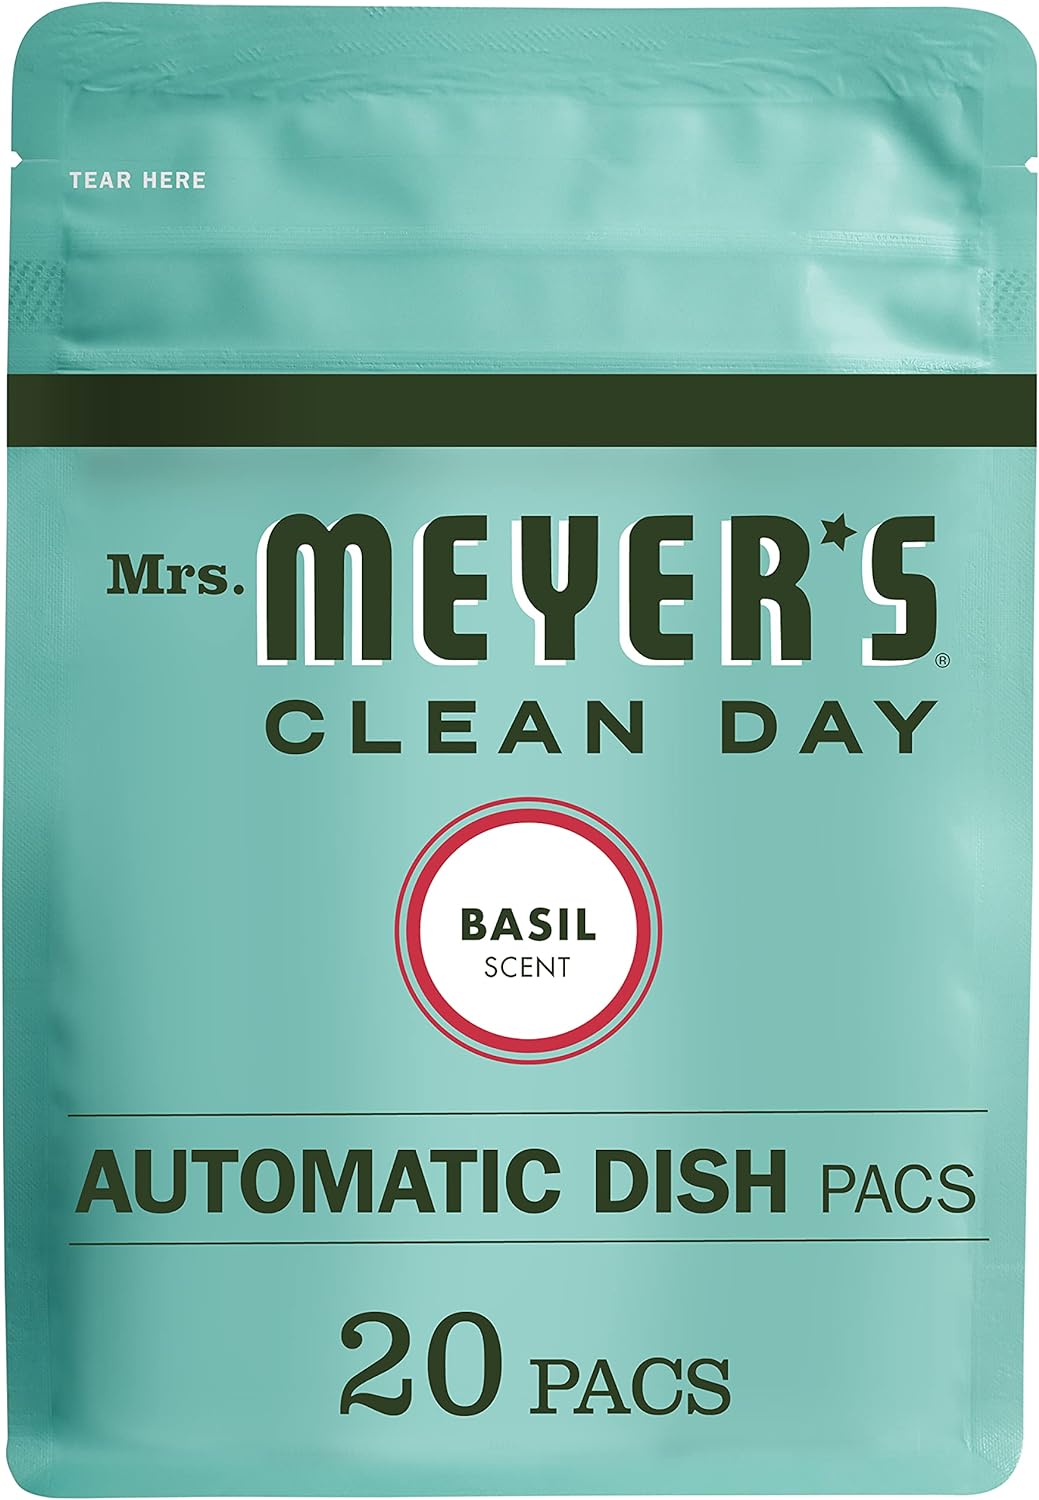 MRS. MEYER'S CLEAN DAY Automatic Dishwasher Pods, Basil, 20 Count